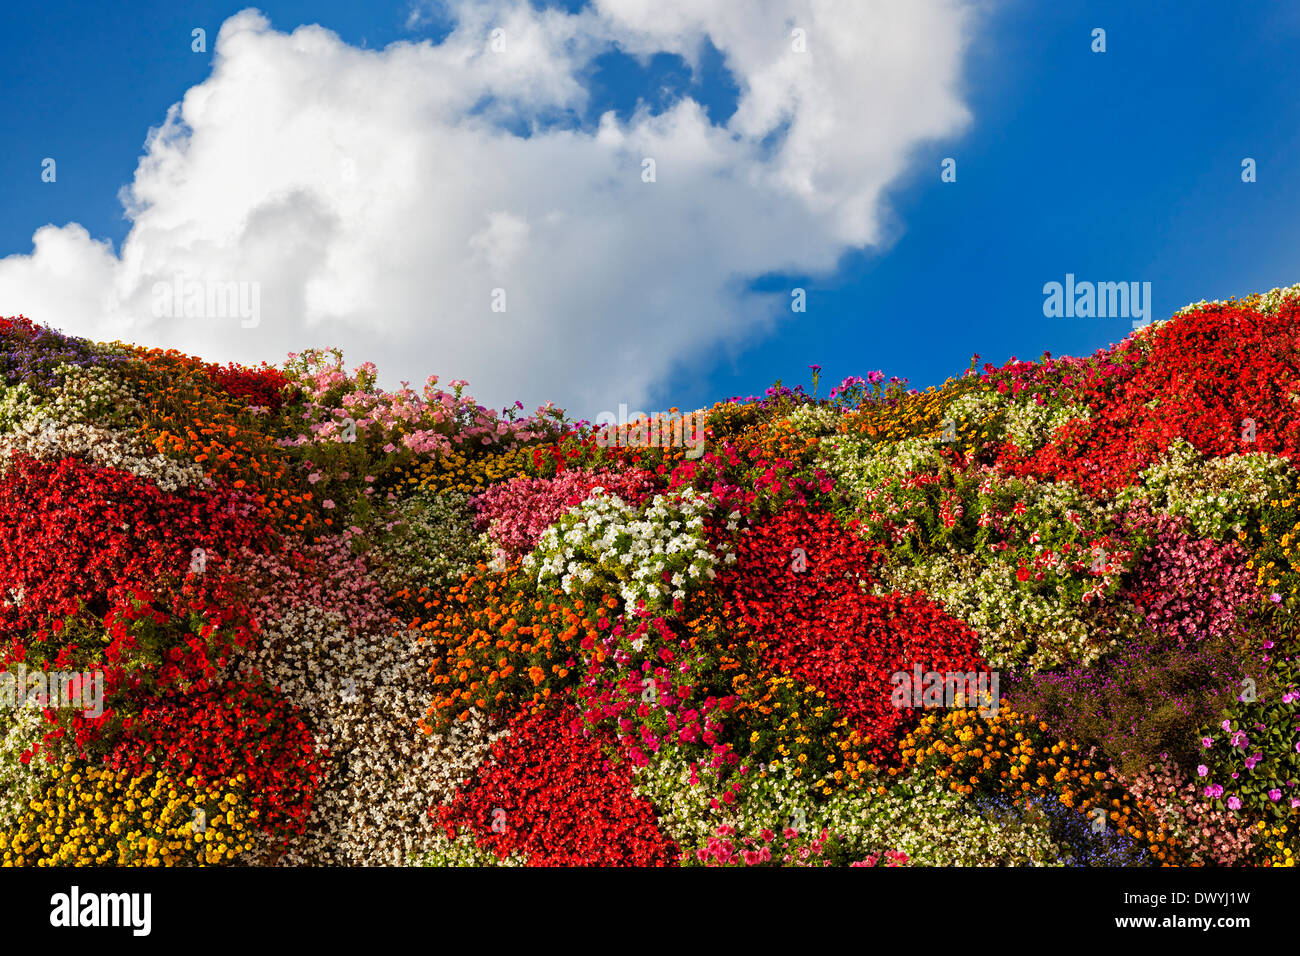 Multicolored flower hill with a cloudy blue sky as background Stock Photo